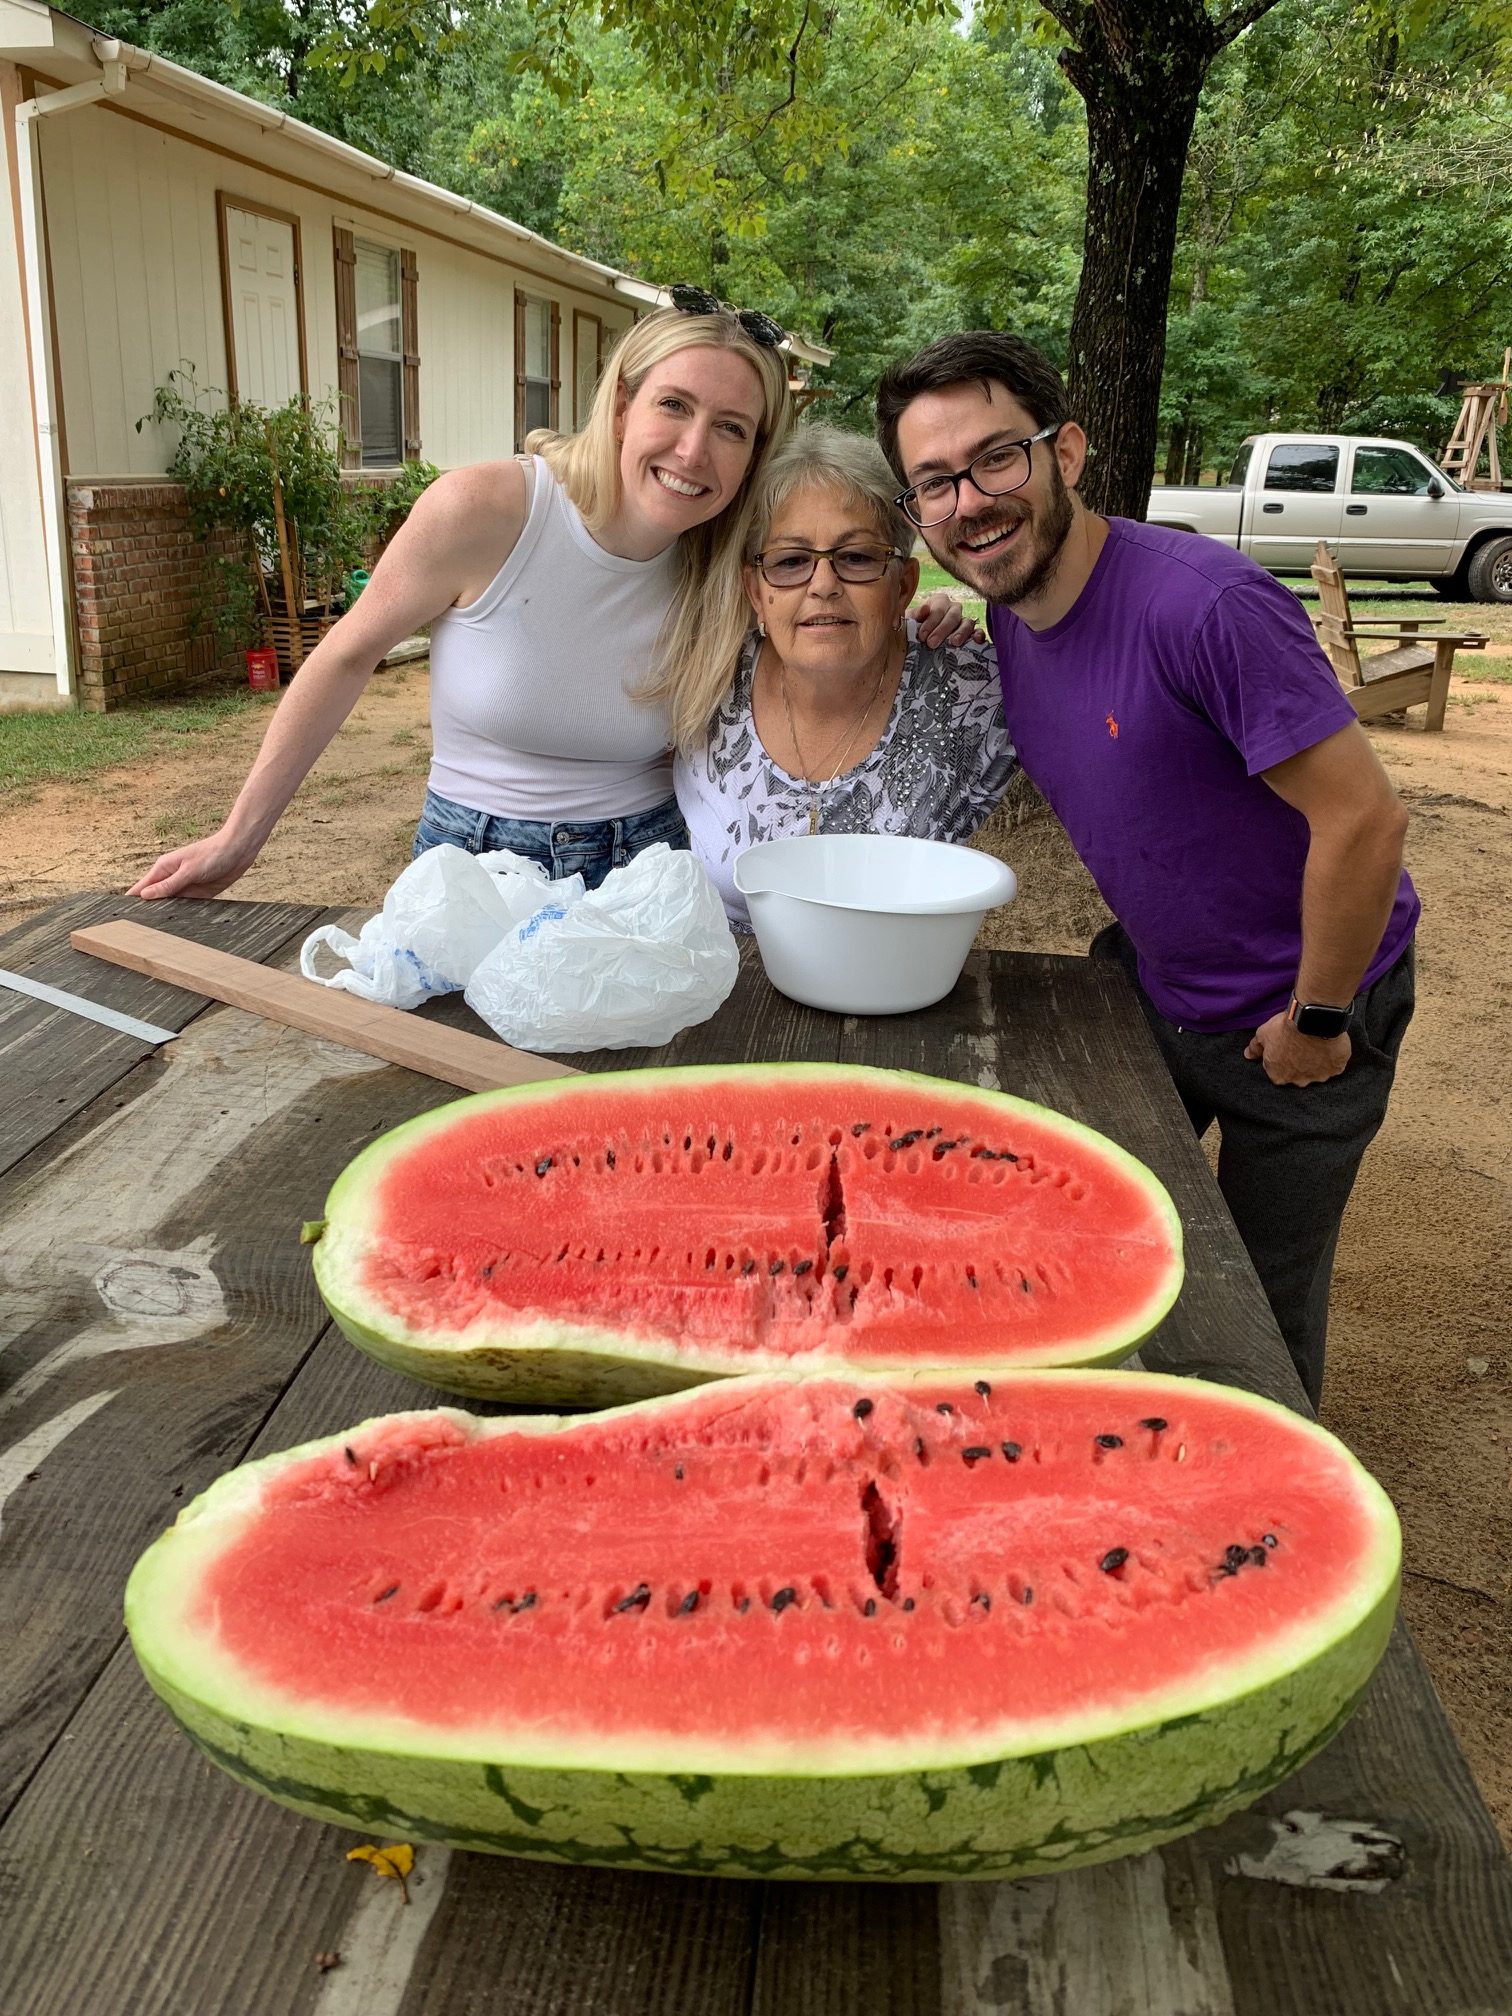 A photo shows Elaine Ross with her son, Skyler Kern, and his wife, Sydney Kern, standing by a picnic table. A cut watermelon rests on the table.